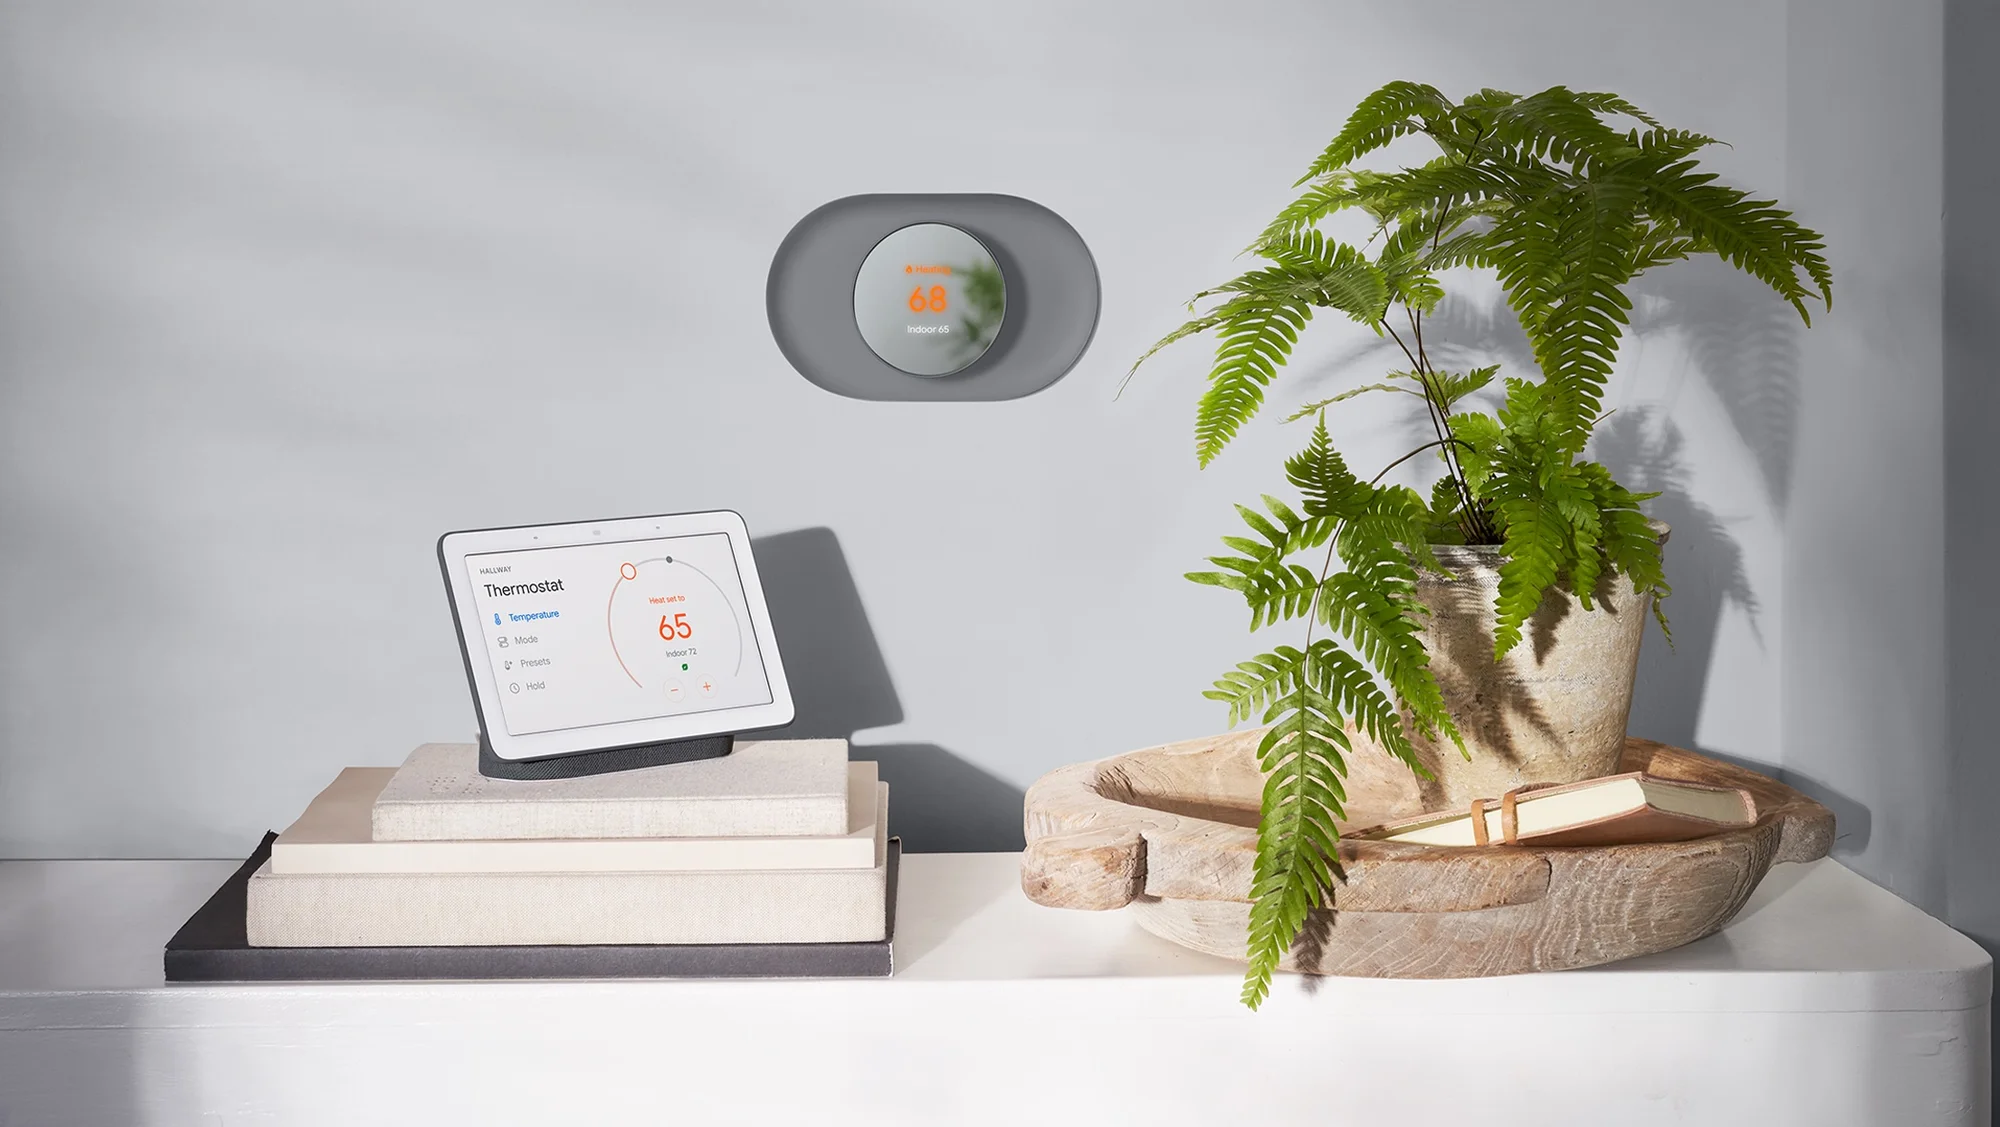 4 ways Google Nest makes it easy to save energy